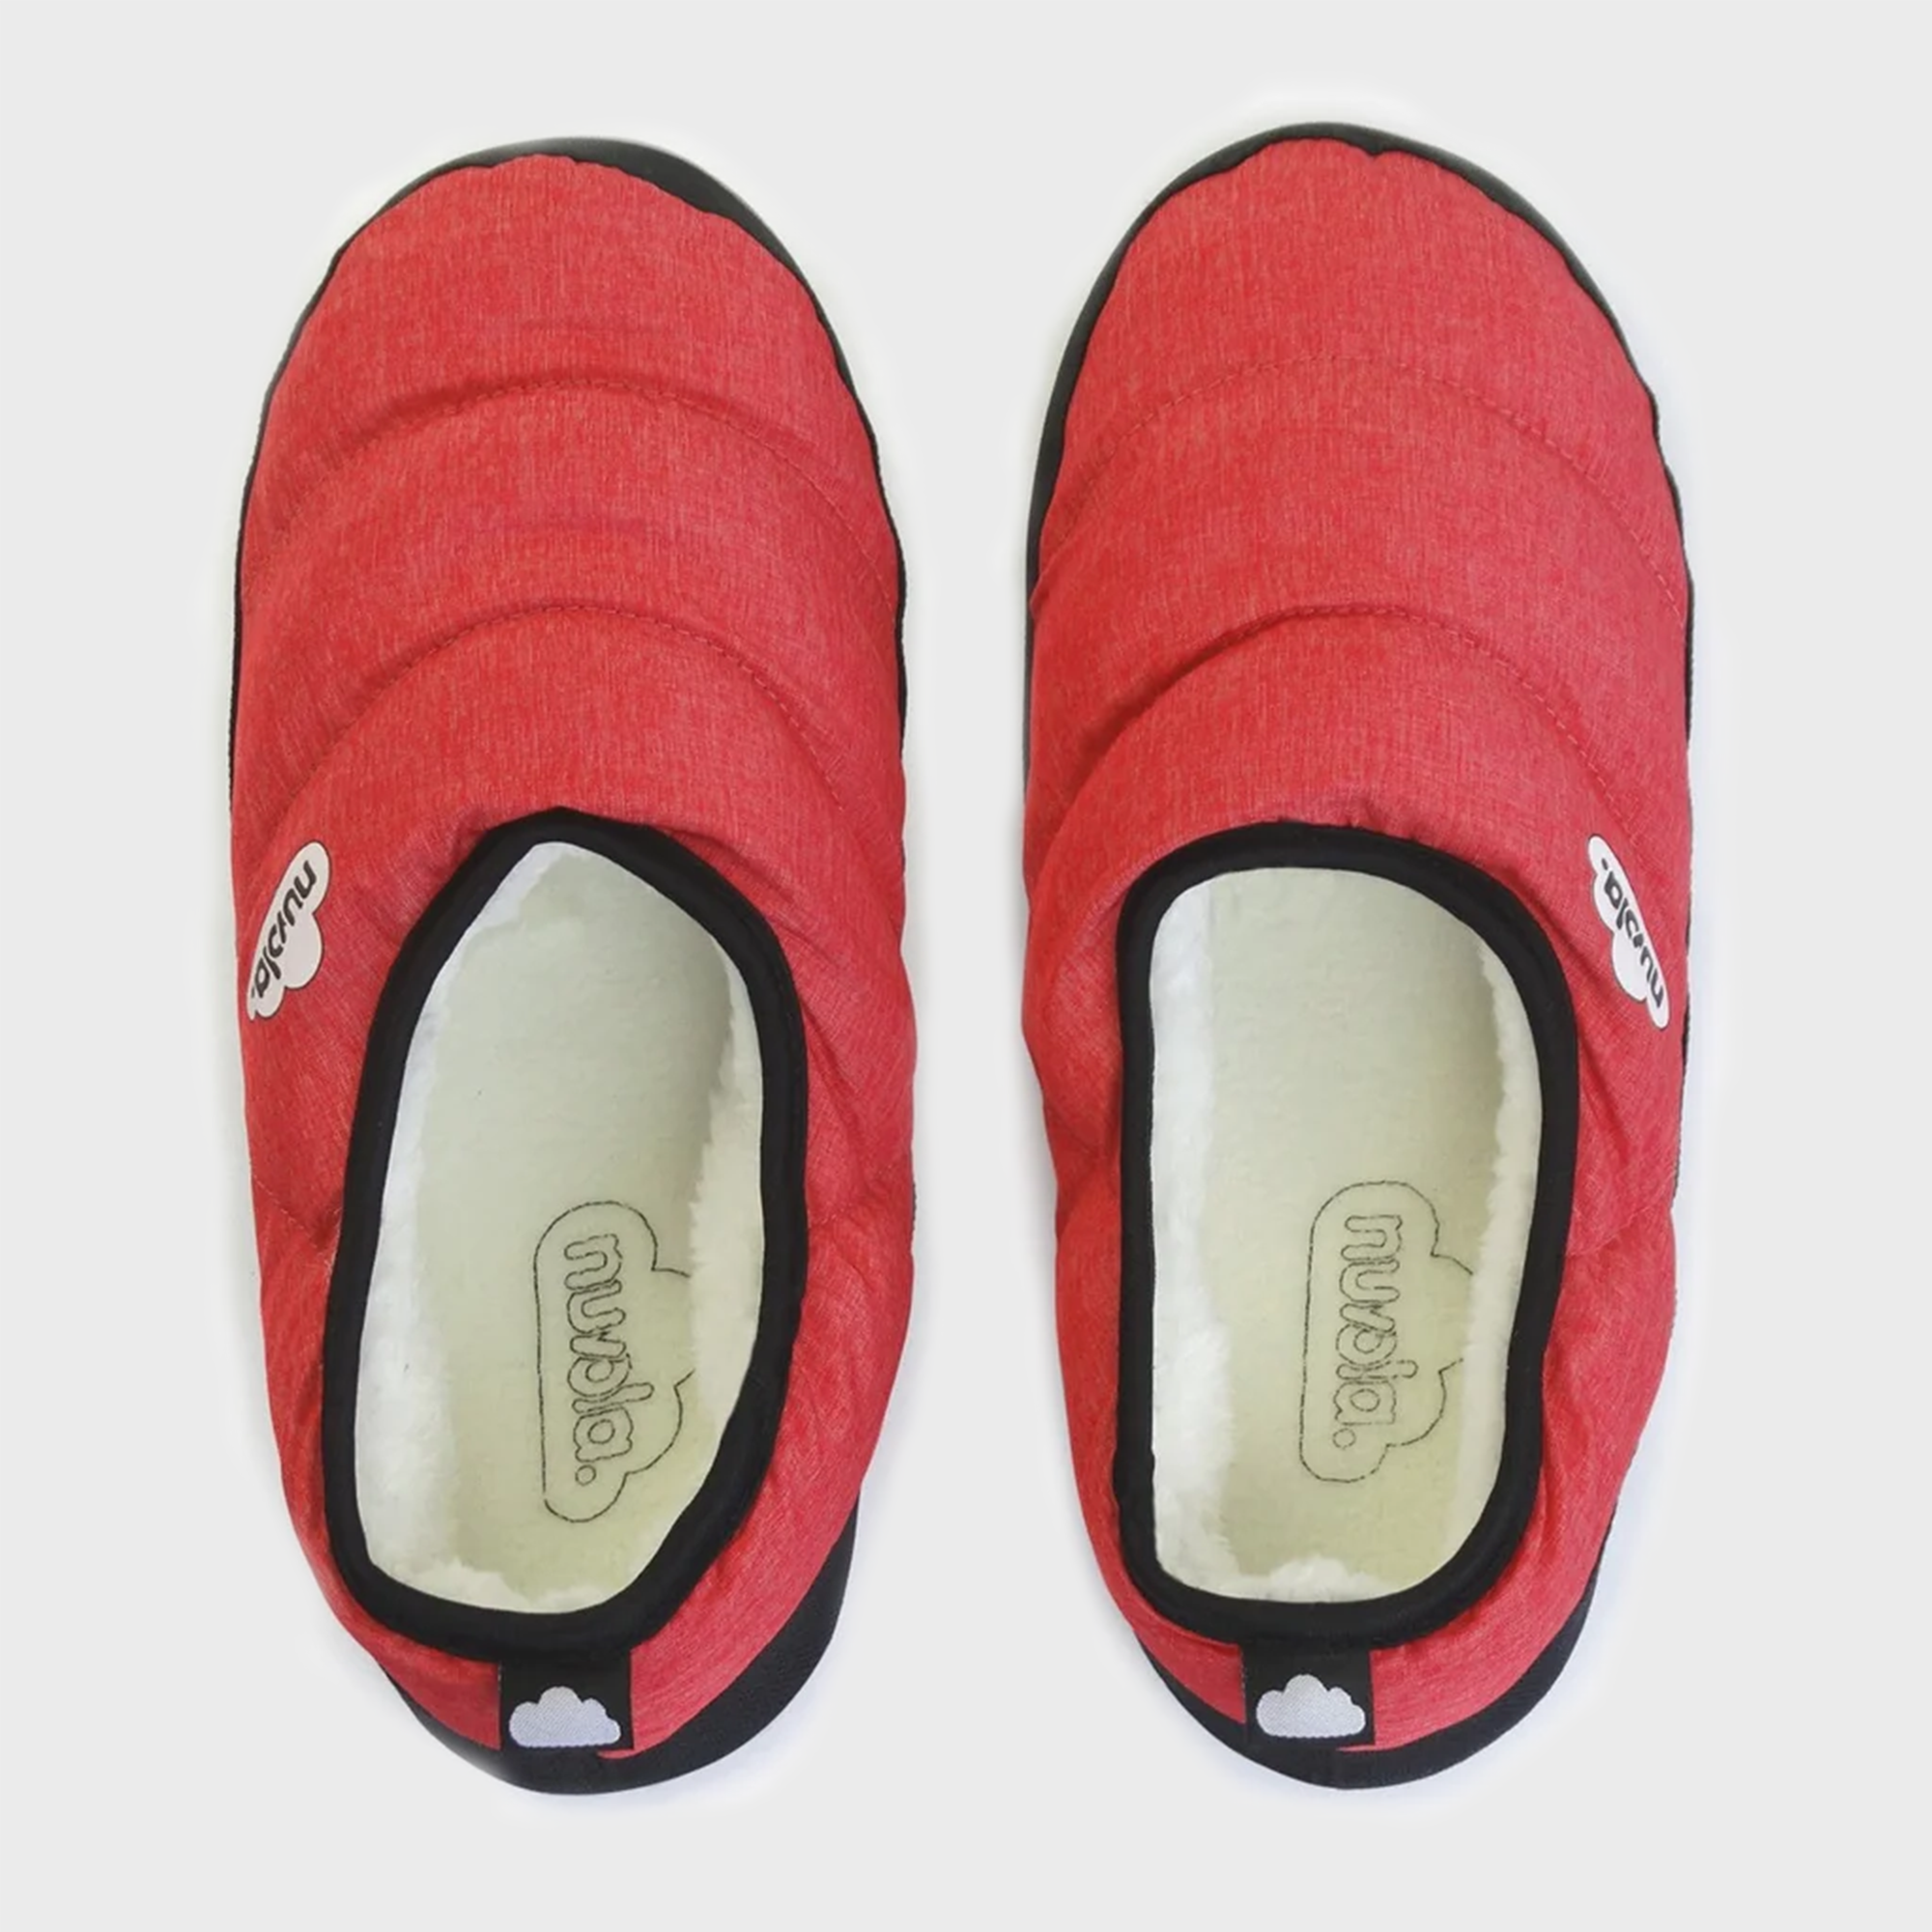 Nuvola Classic Marbled Chill Slippers in Salmon CNJASCHILL696 FROM EIGHTYWINGOLD - OFFICIAL BRAND PARTNER